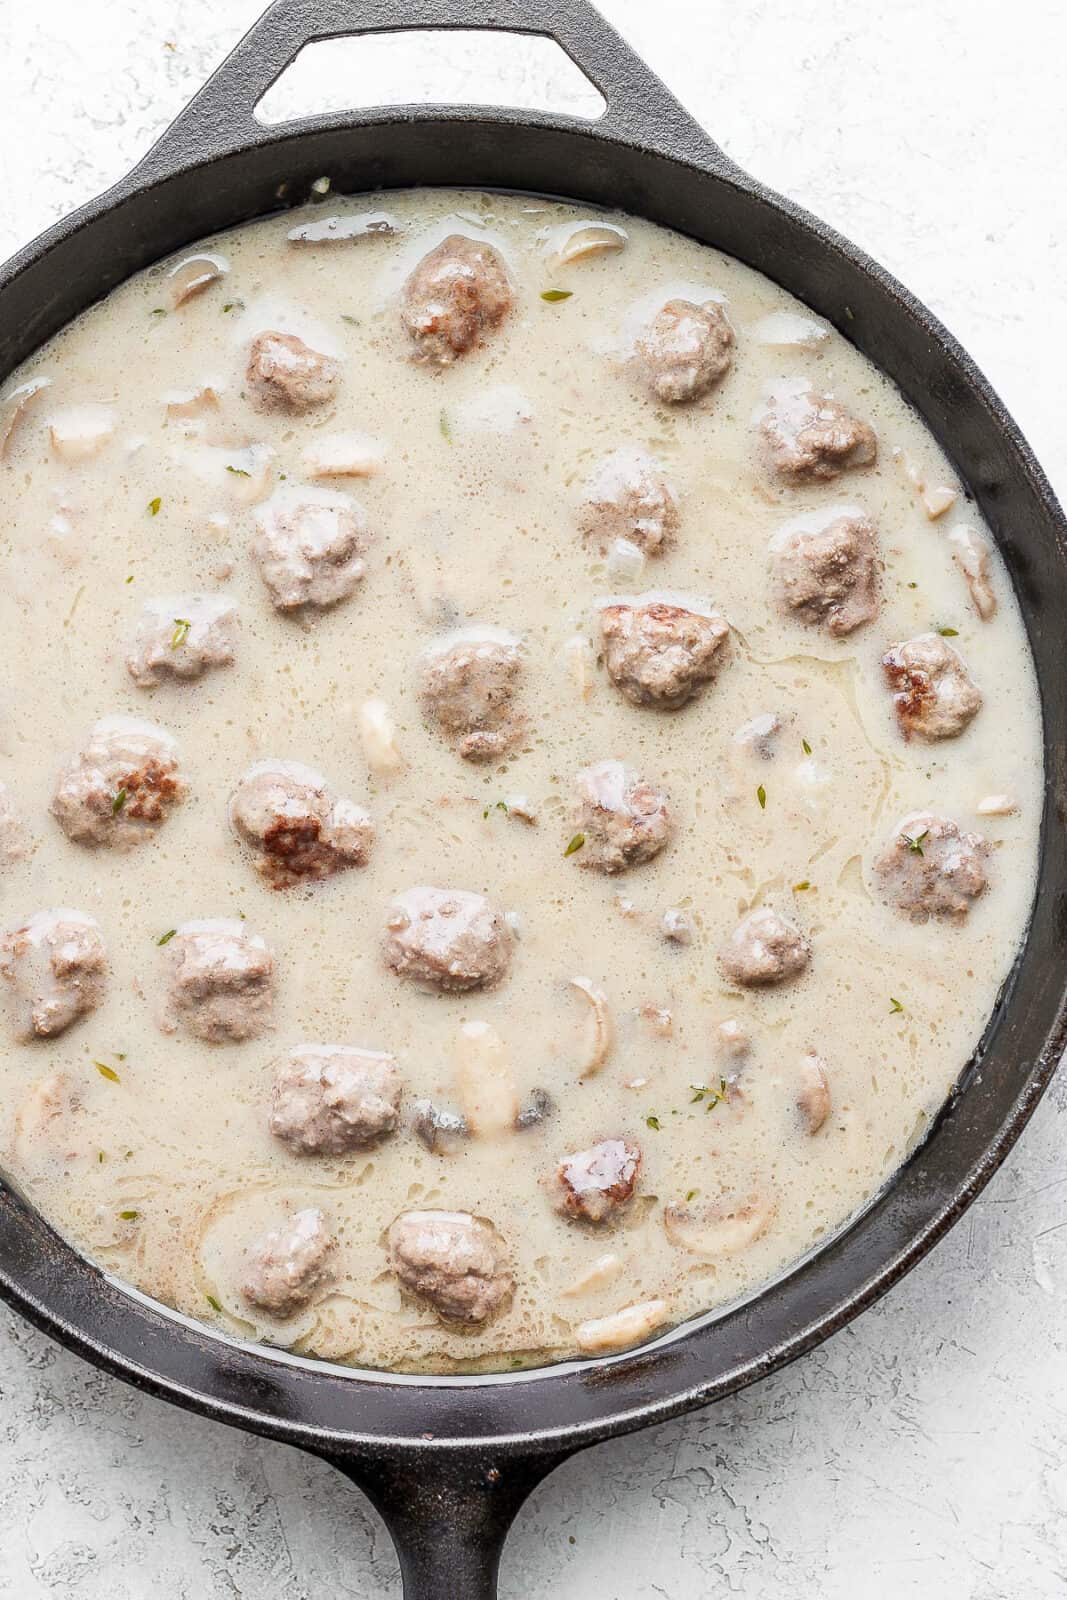 Meatballs and cream of mushroom soup in a cast iron skillet.